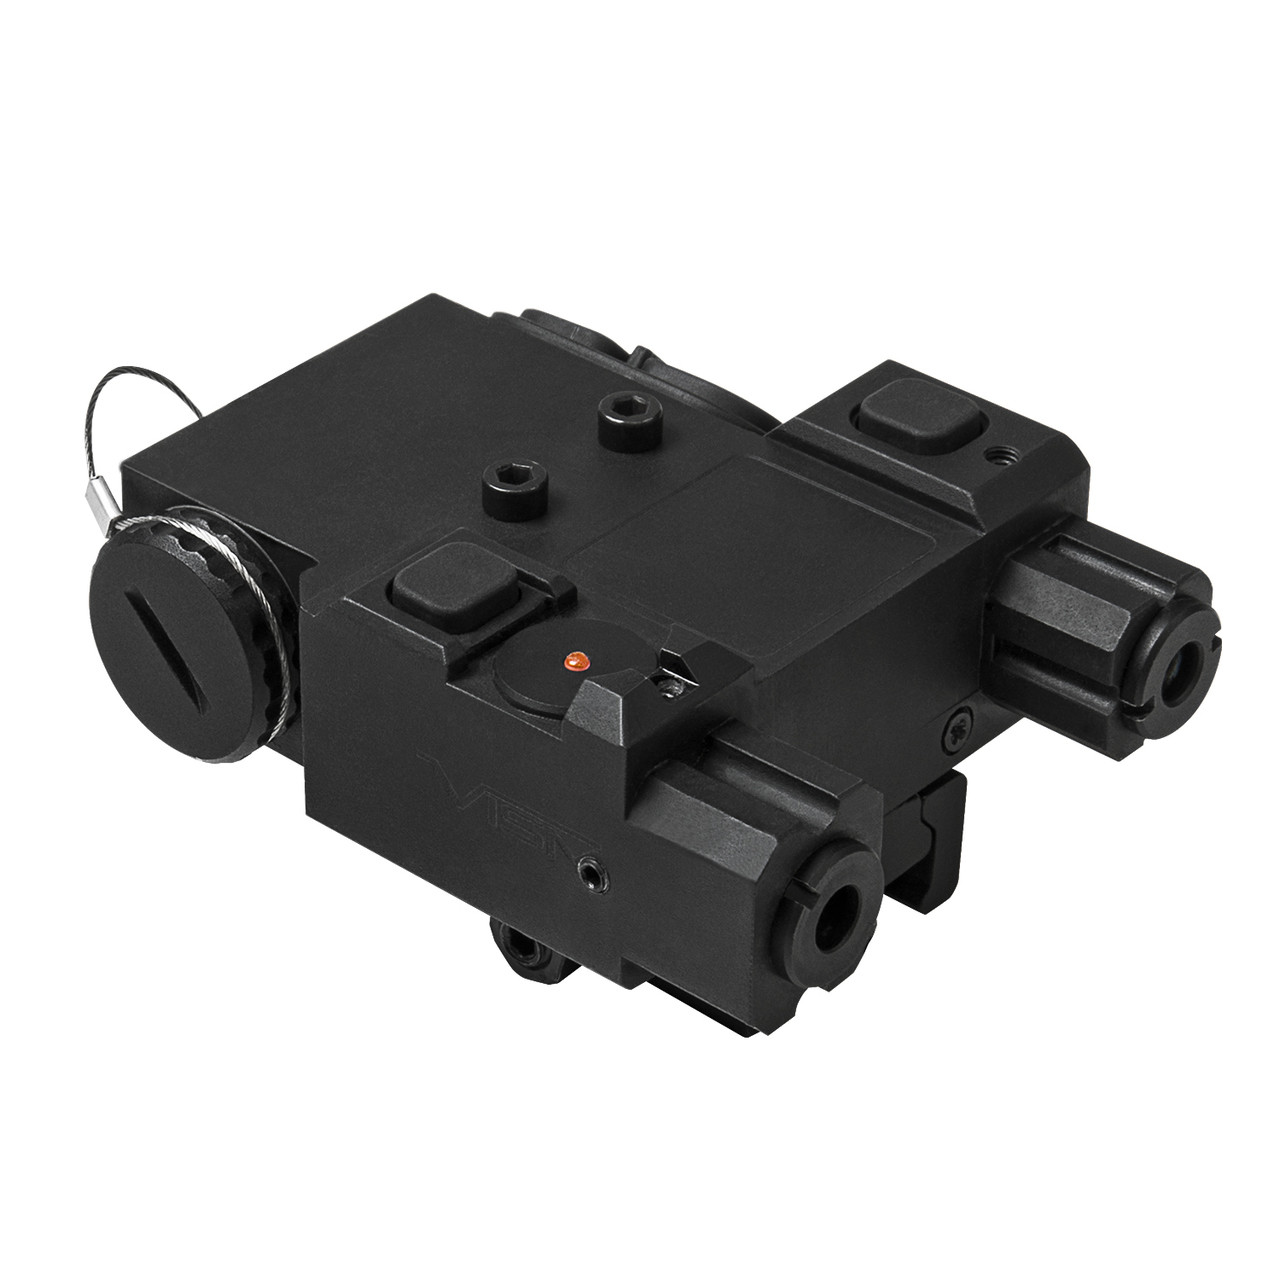 NcSTAR VLGIRQRB Designator Box With Green & Infrared Lasers/ Quick Release Mount & Remote Pressure Switch